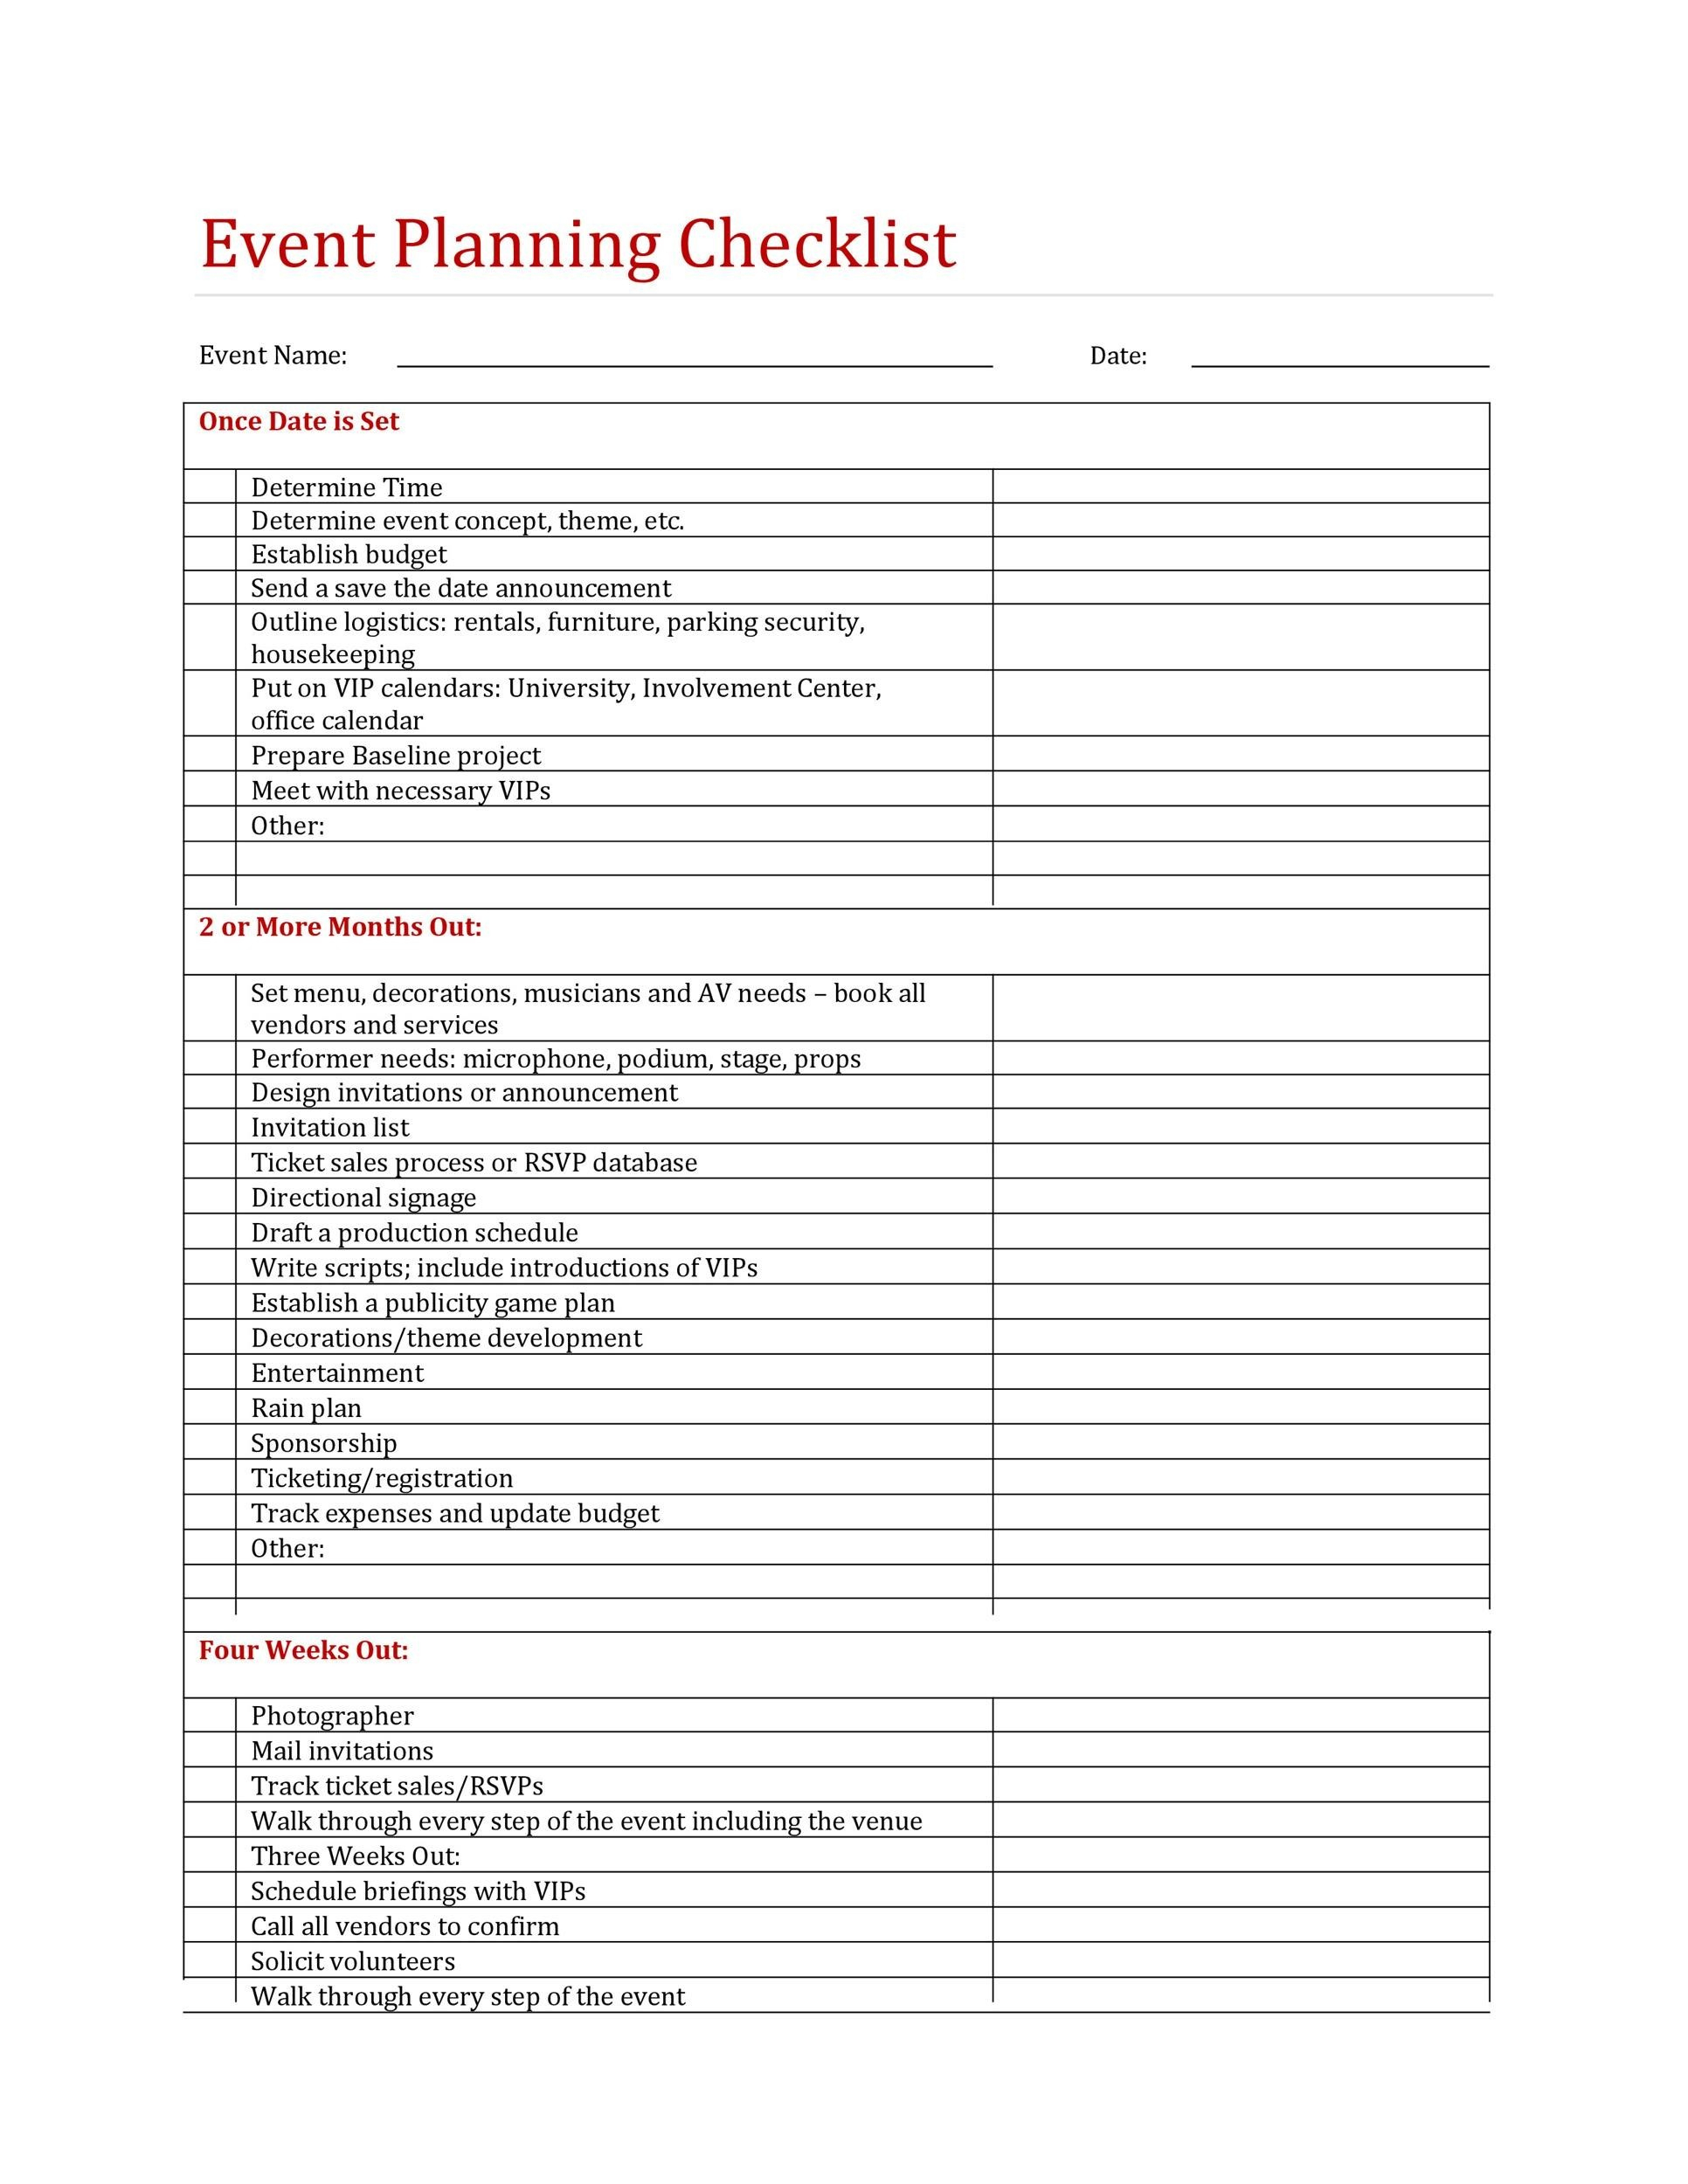 10 Professional Event Planning Checklist Templates ᐅ TemplateLab Intended For Meeting Planning Checklist Template Intended For Meeting Planning Checklist Template